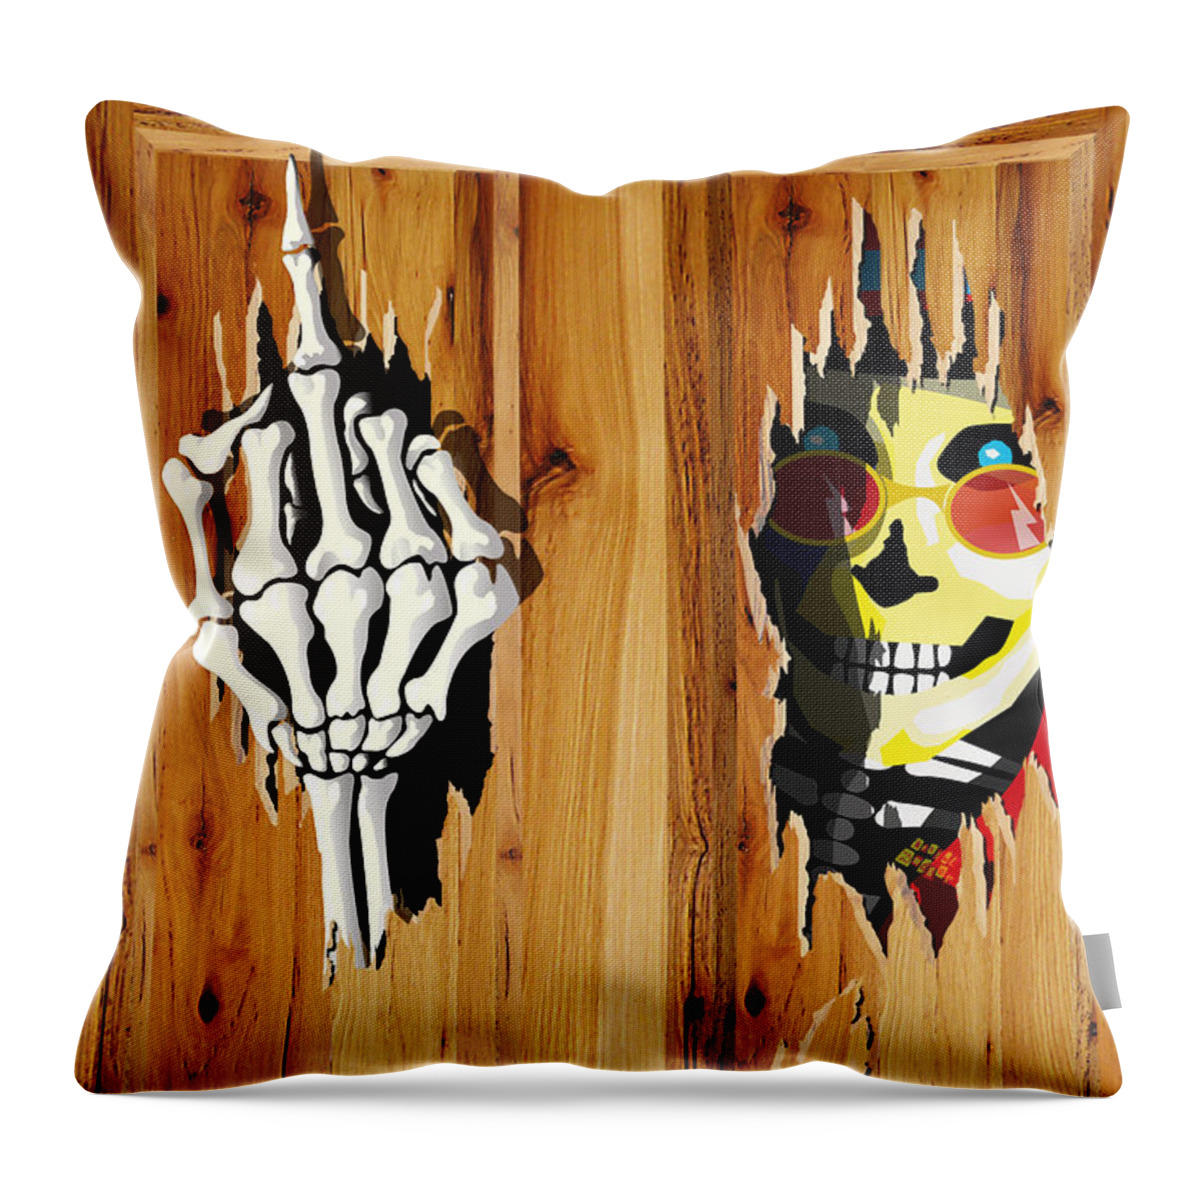 Urban Throw Pillow featuring the painting Swivel by Neil Finnemore